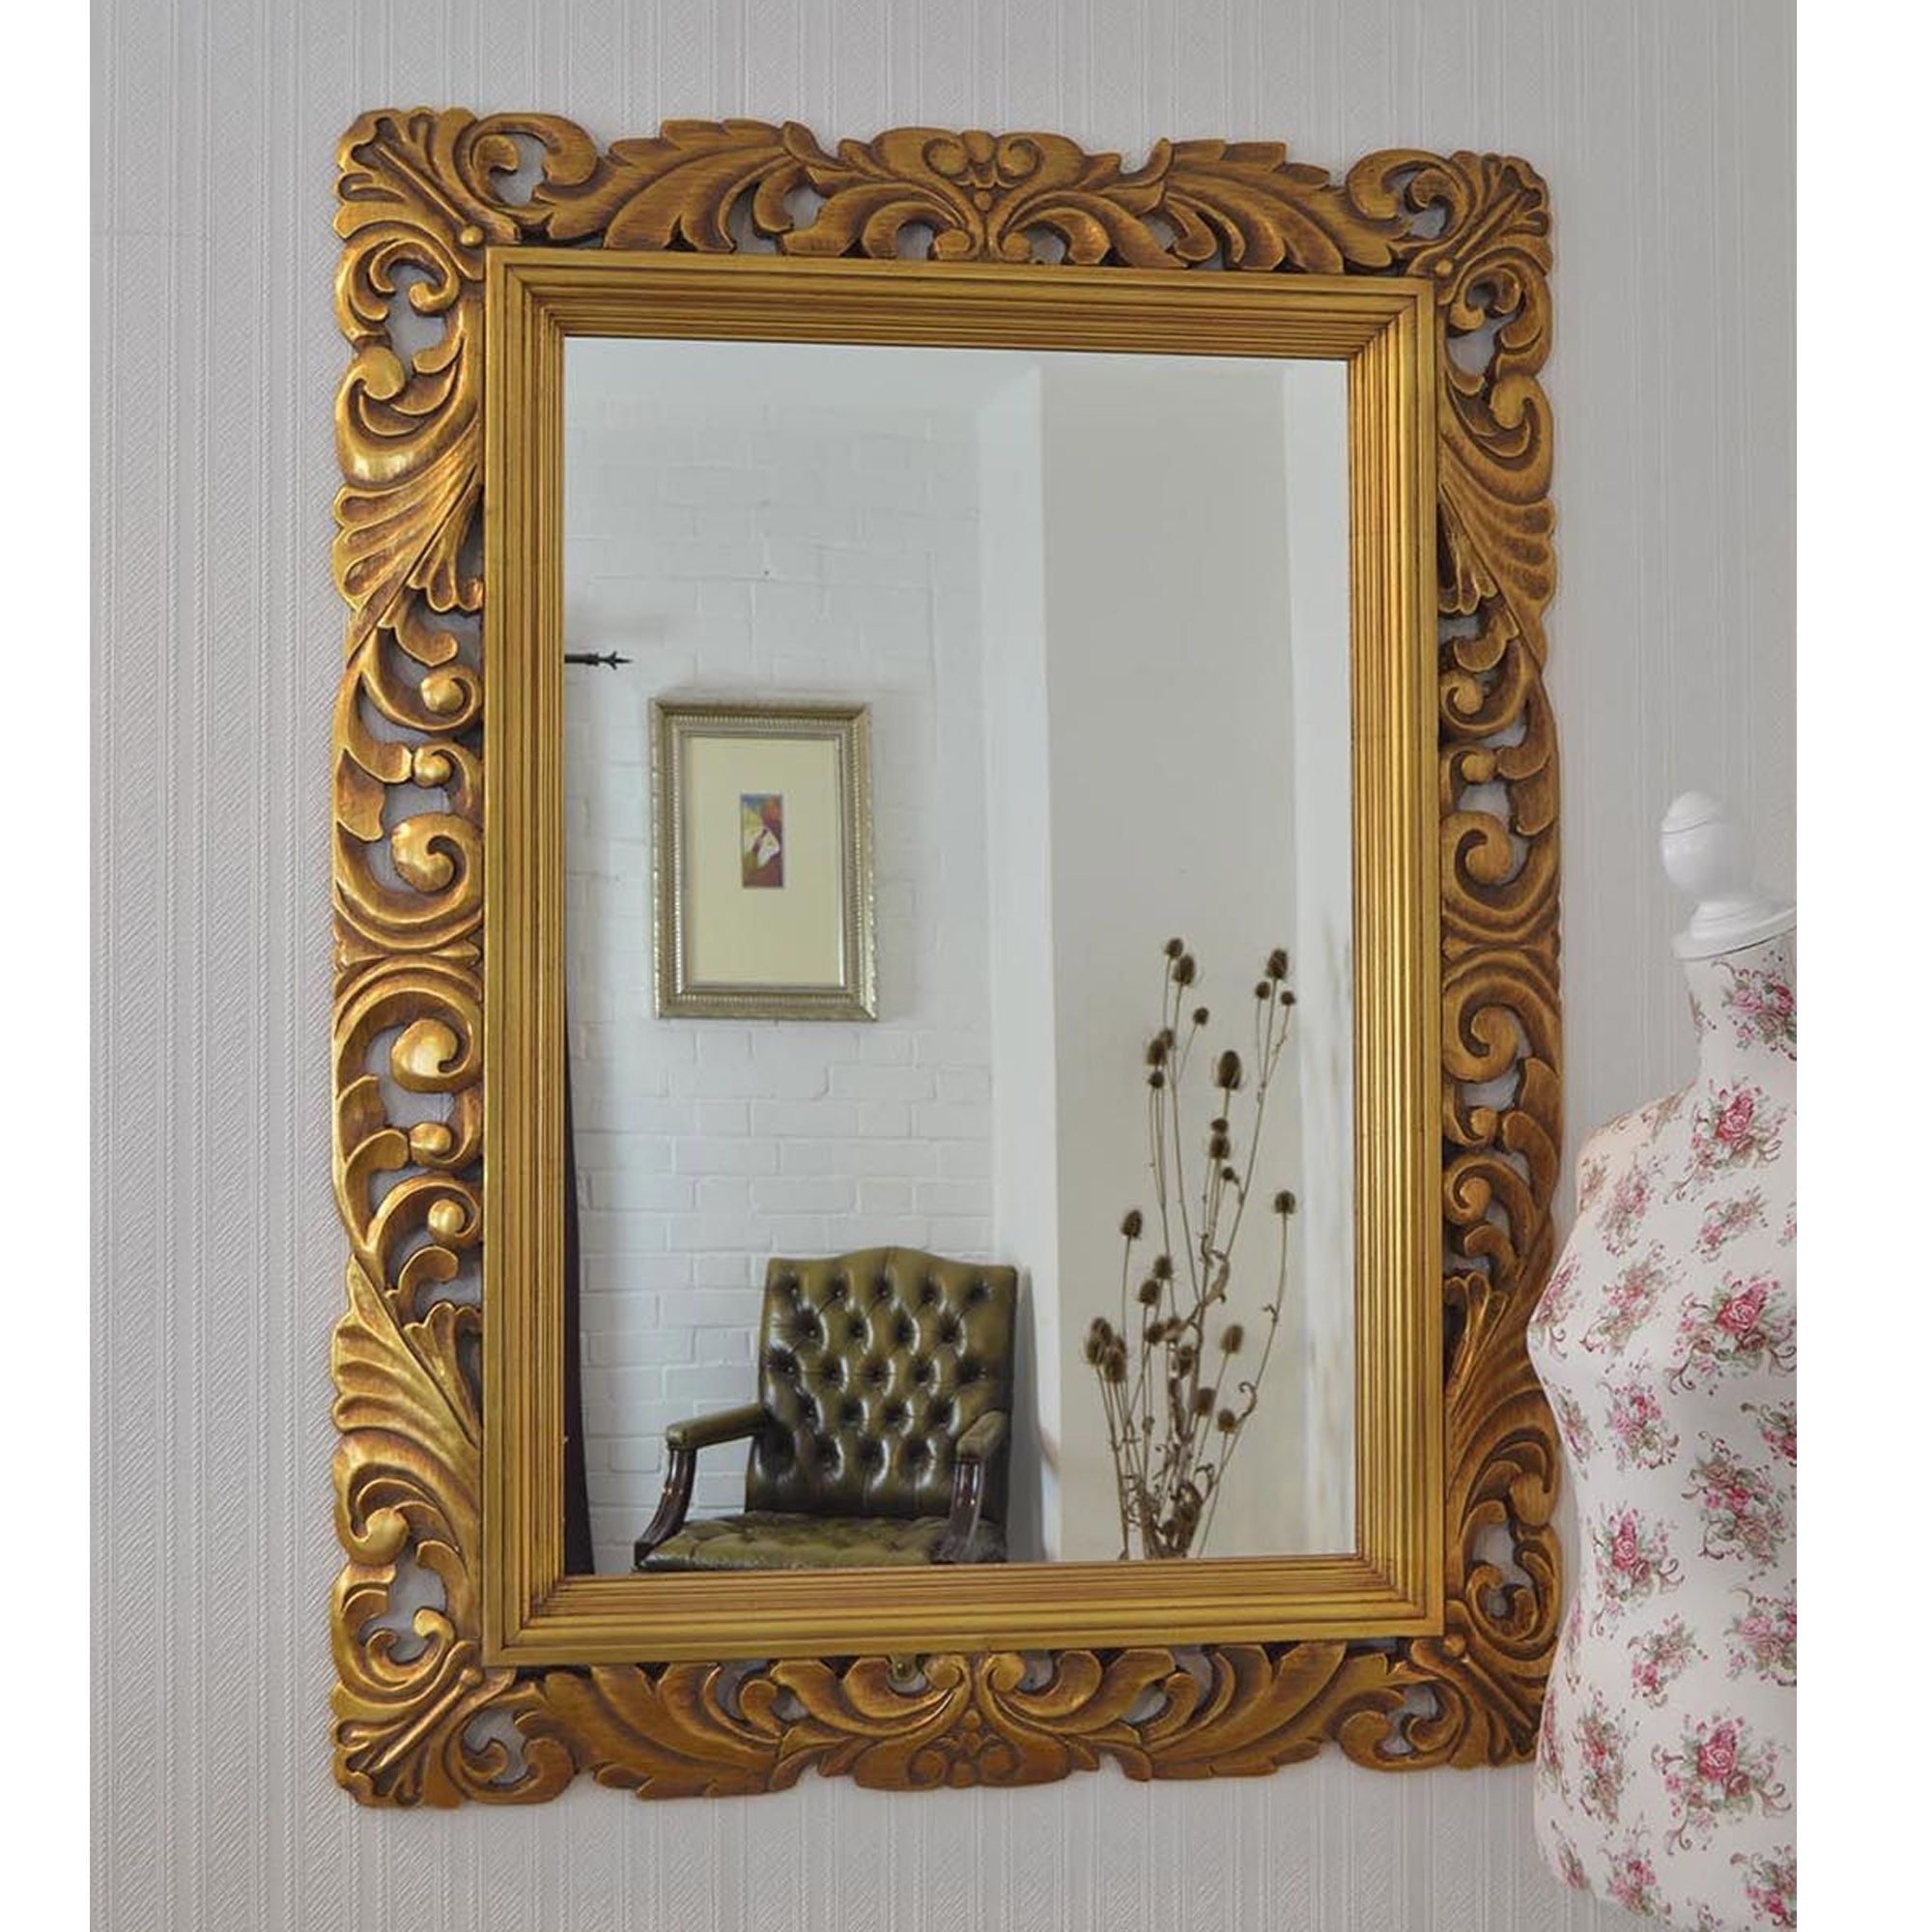 Ornate Framed Gold Antique French Style Wall Mirror – French Mirrors Throughout Antiqued Glass Wall Mirrors (View 1 of 15)